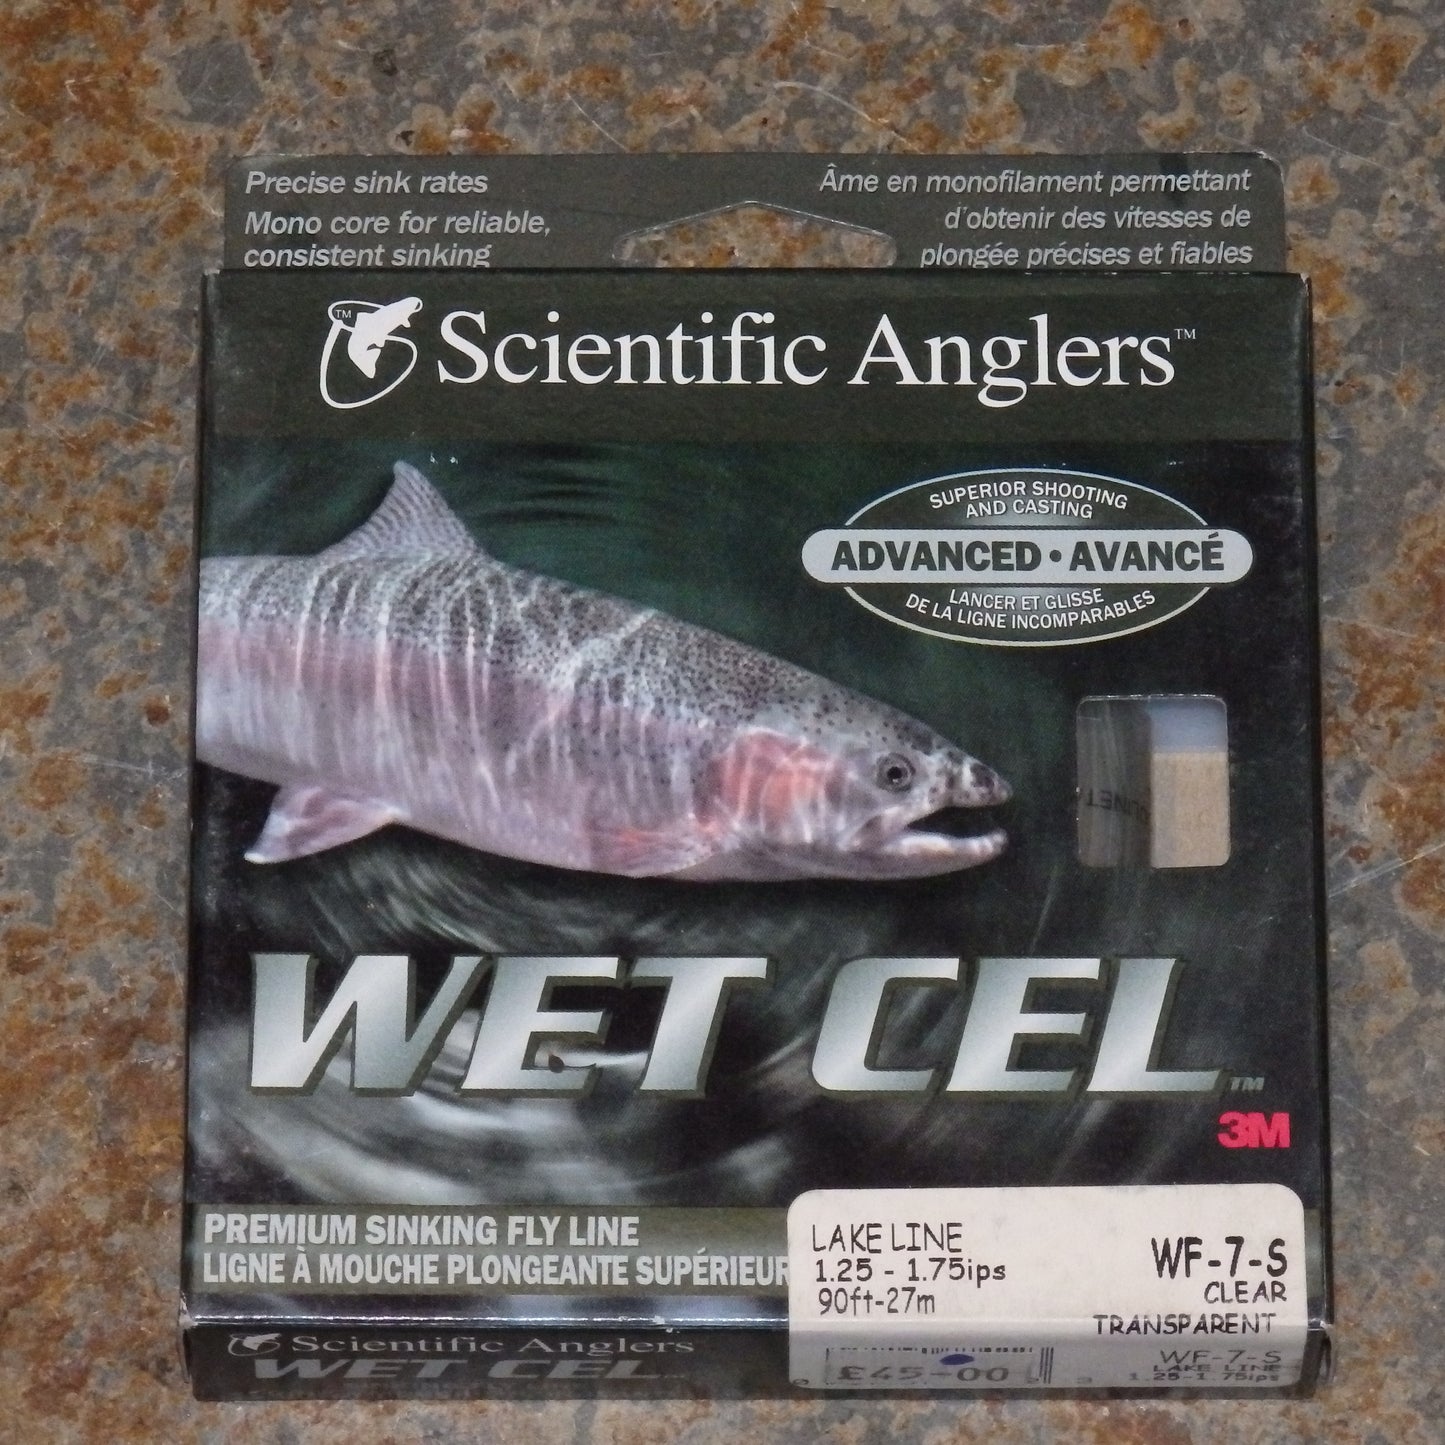 Scientific Anglers Wet Cel Lake line clear